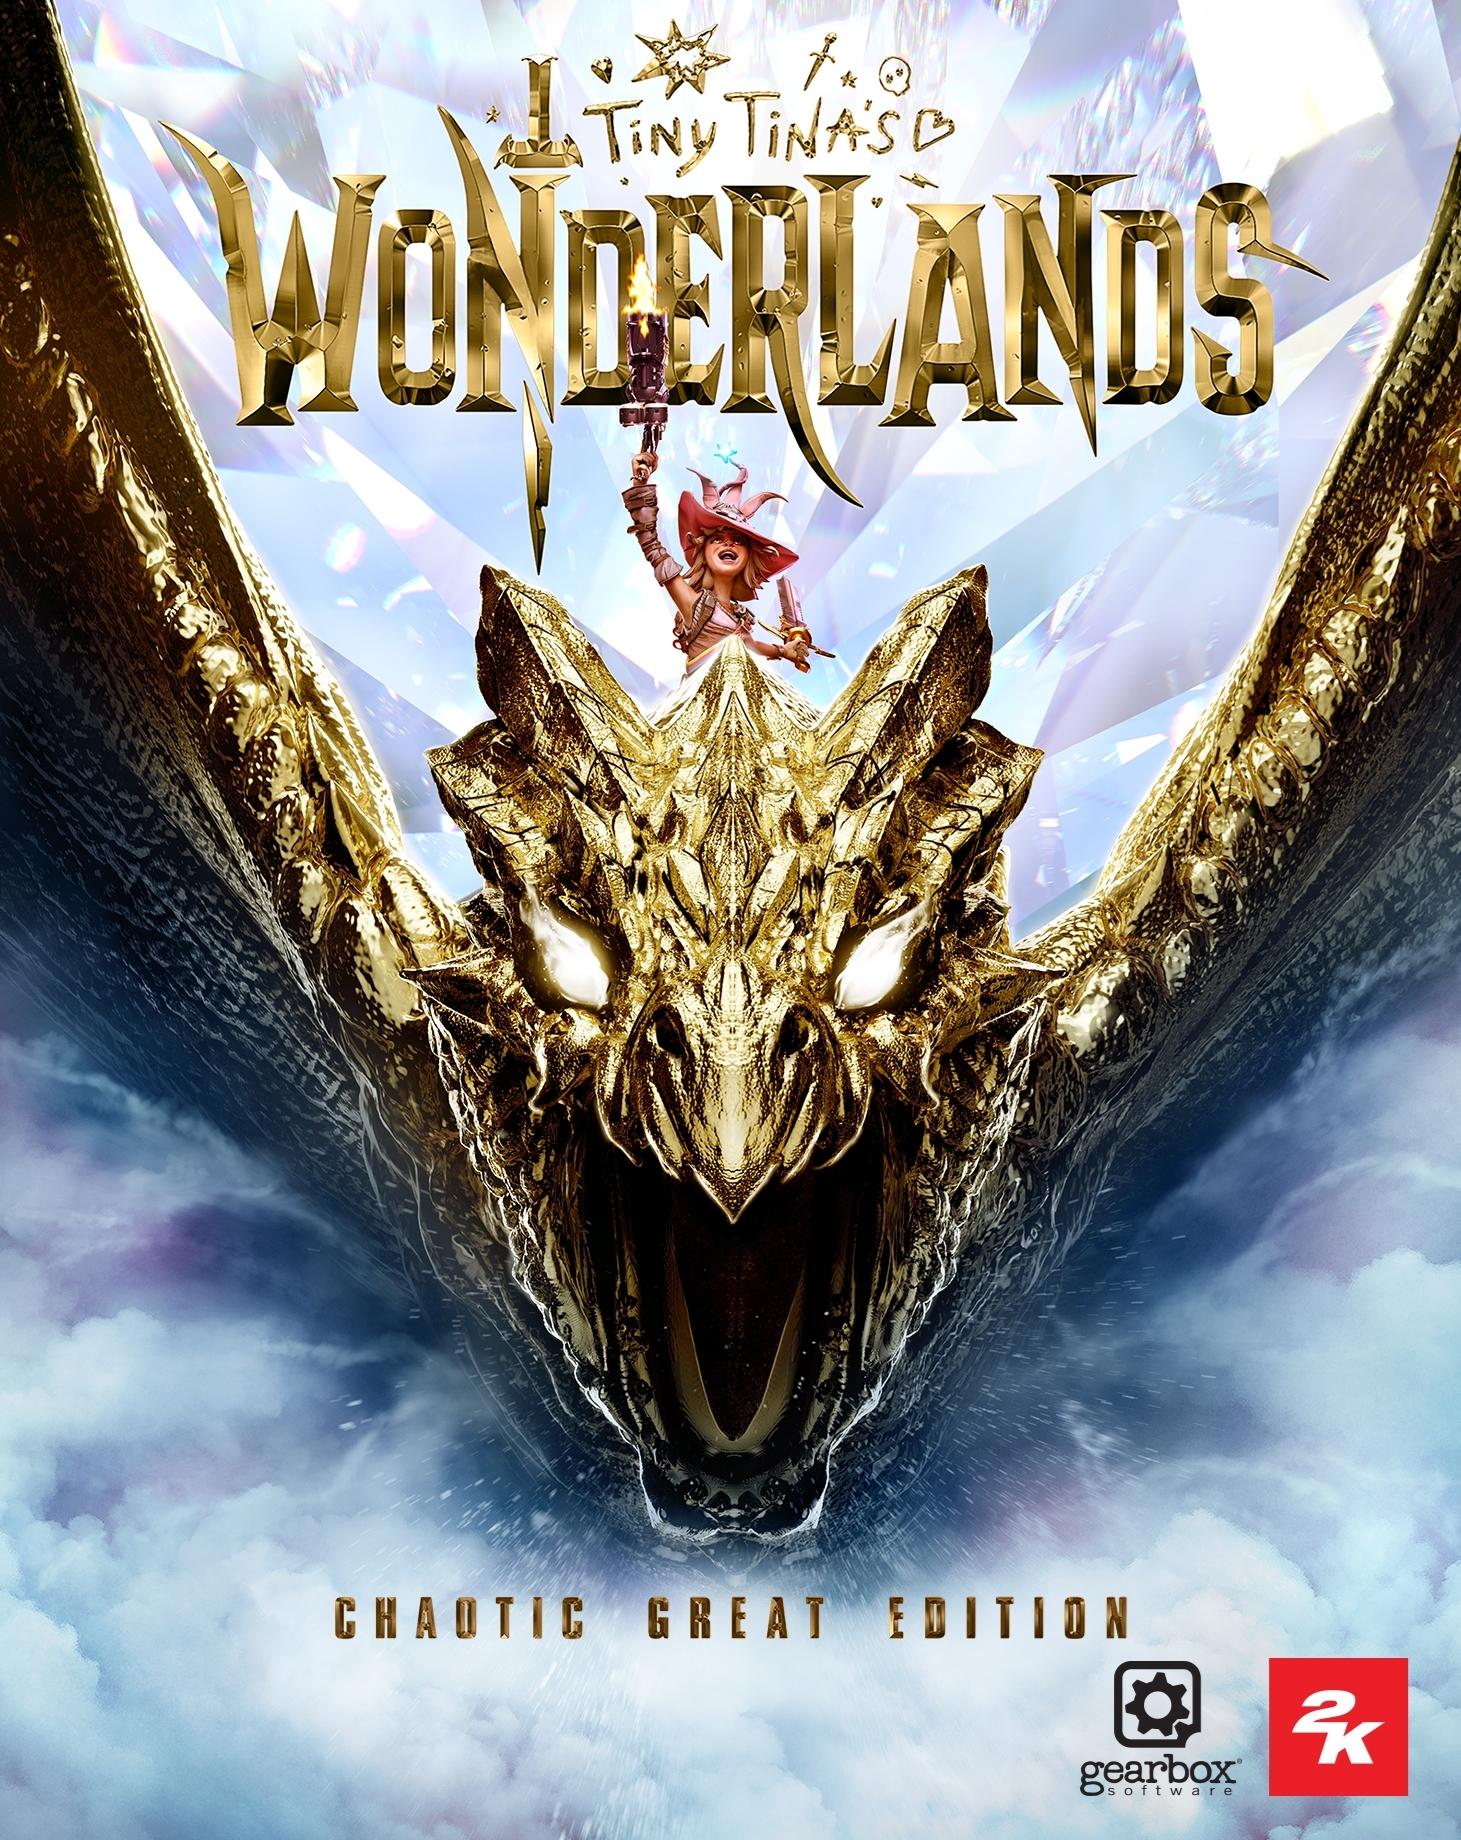 Tiny Tina's Wonderlands: Chaotic Great Edition - Early Adopter (Steam) | ROW (85afe612-2bd6-4fa4-aeb5-6fd777527a52)